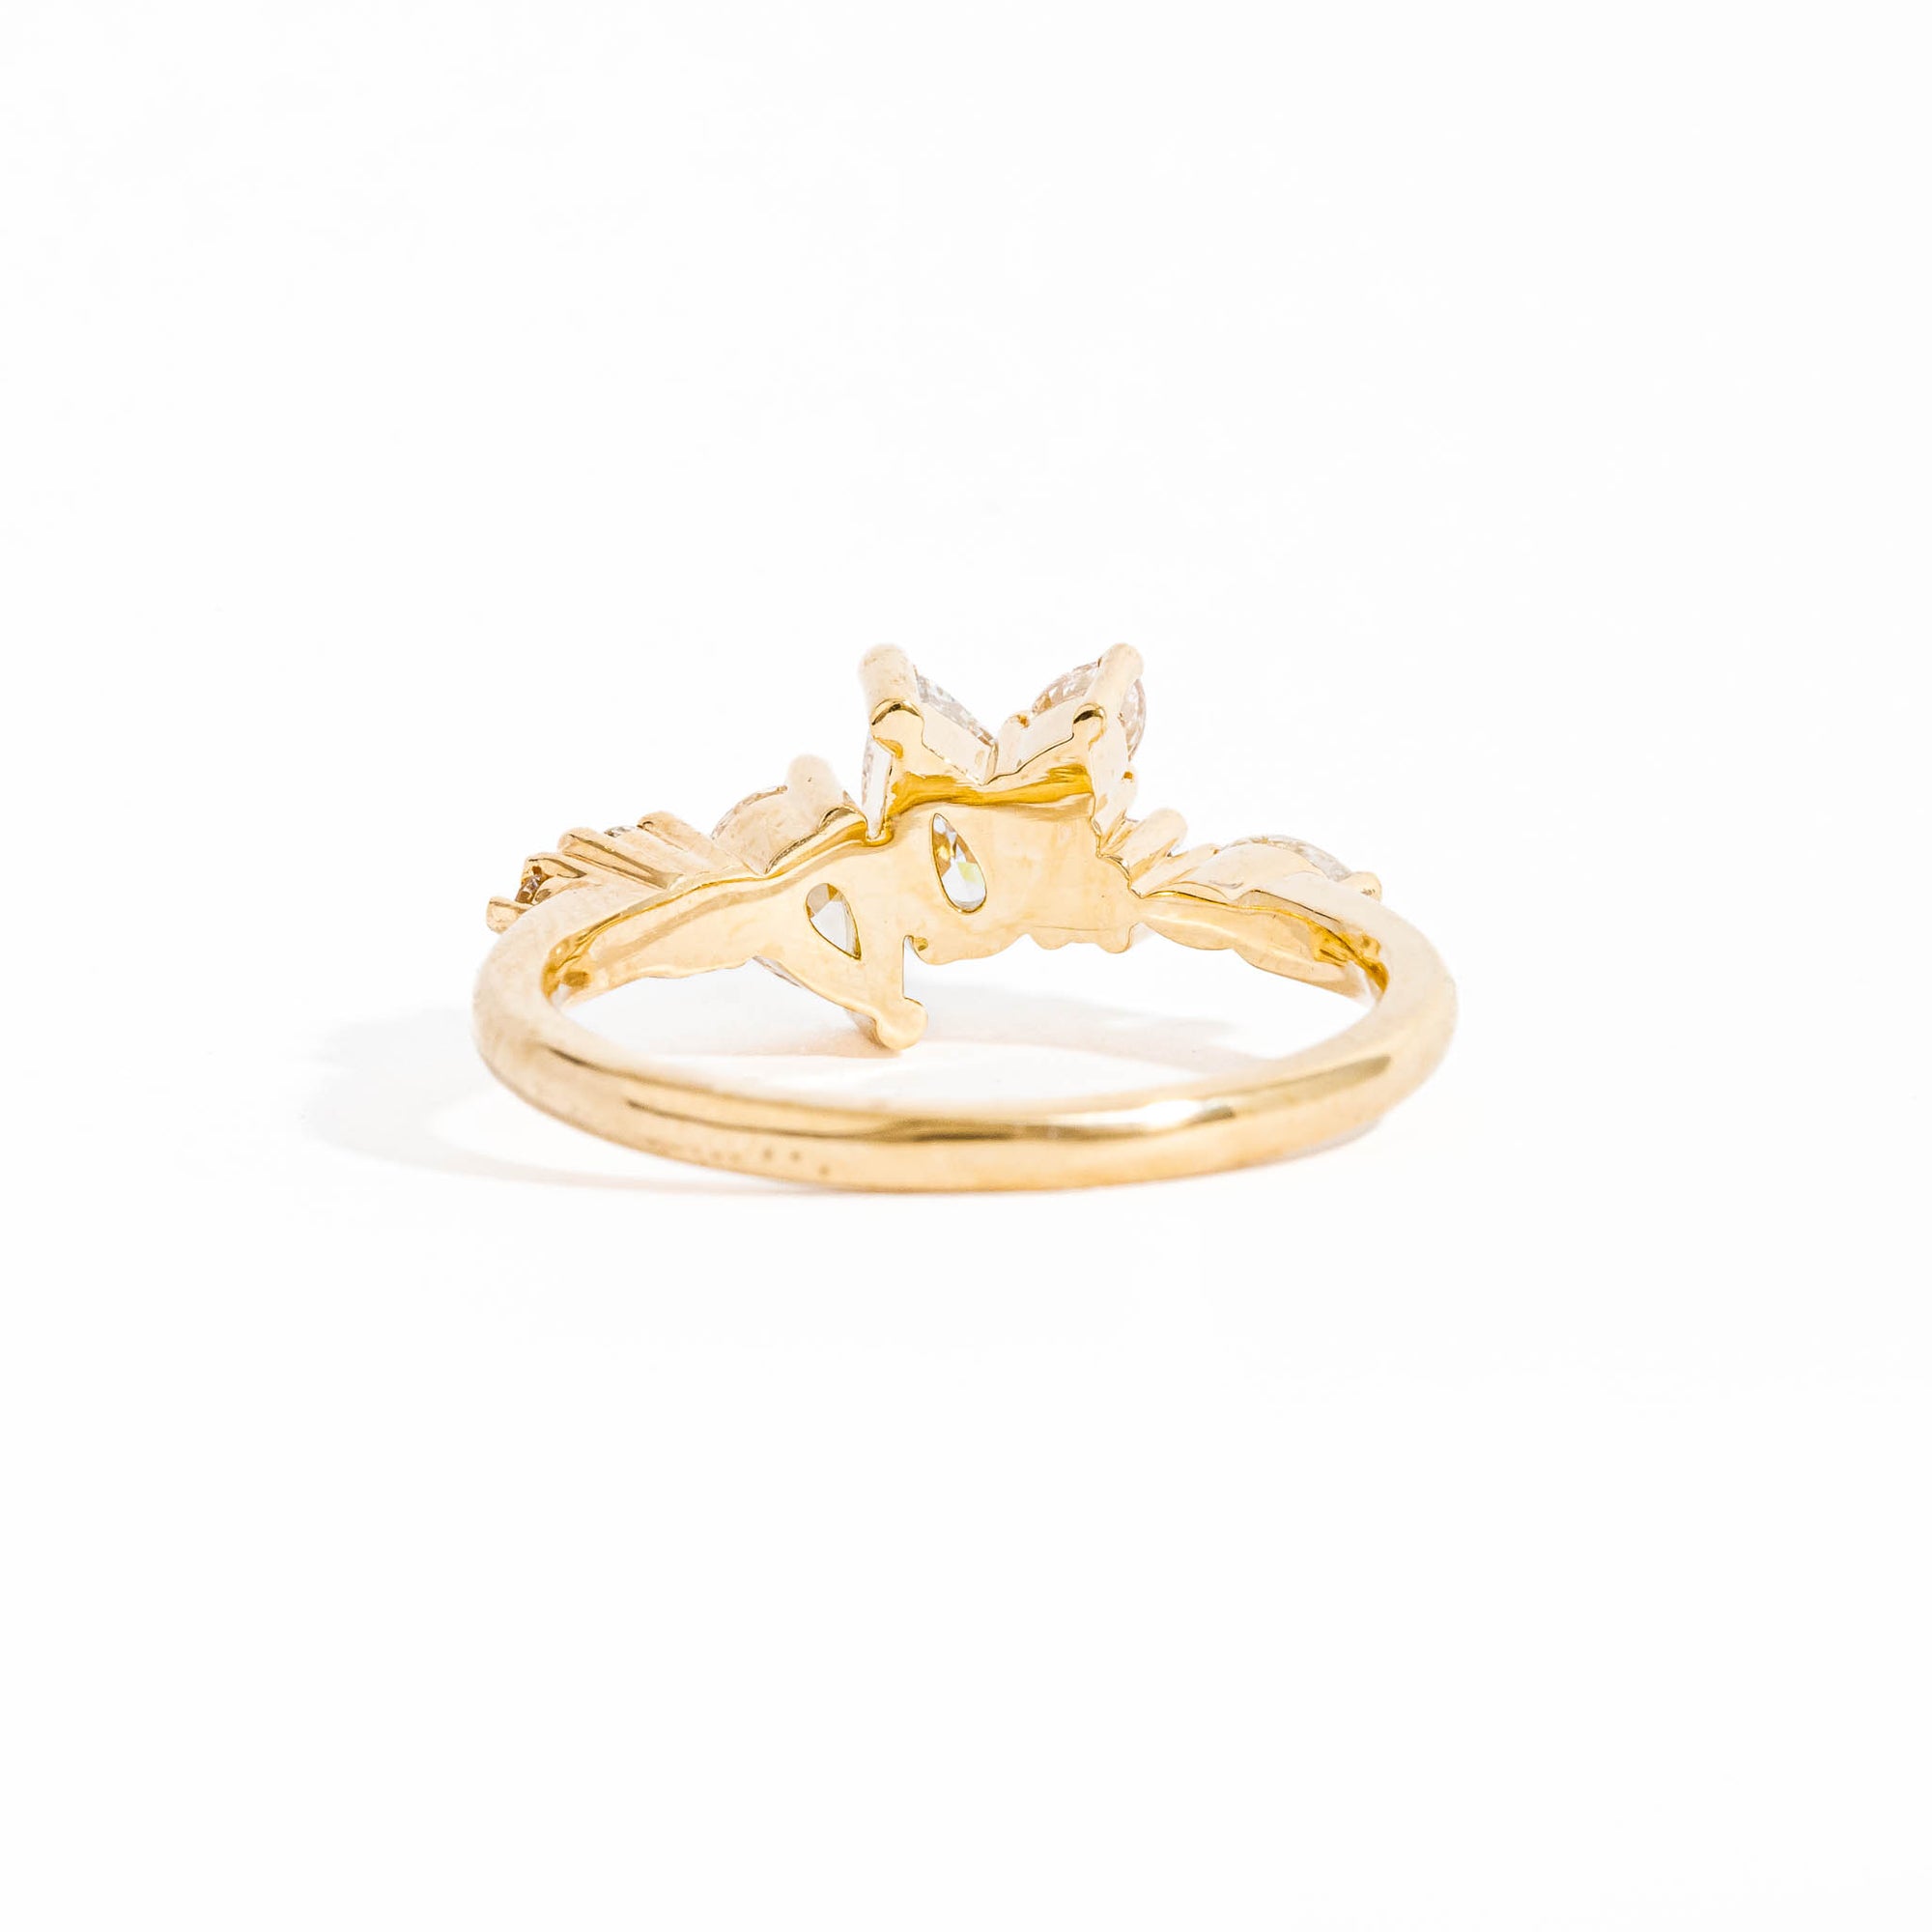 Seven Stone Diamond Ring with Two Pear Cut Diamonds in 18 Carat Yellow Gold